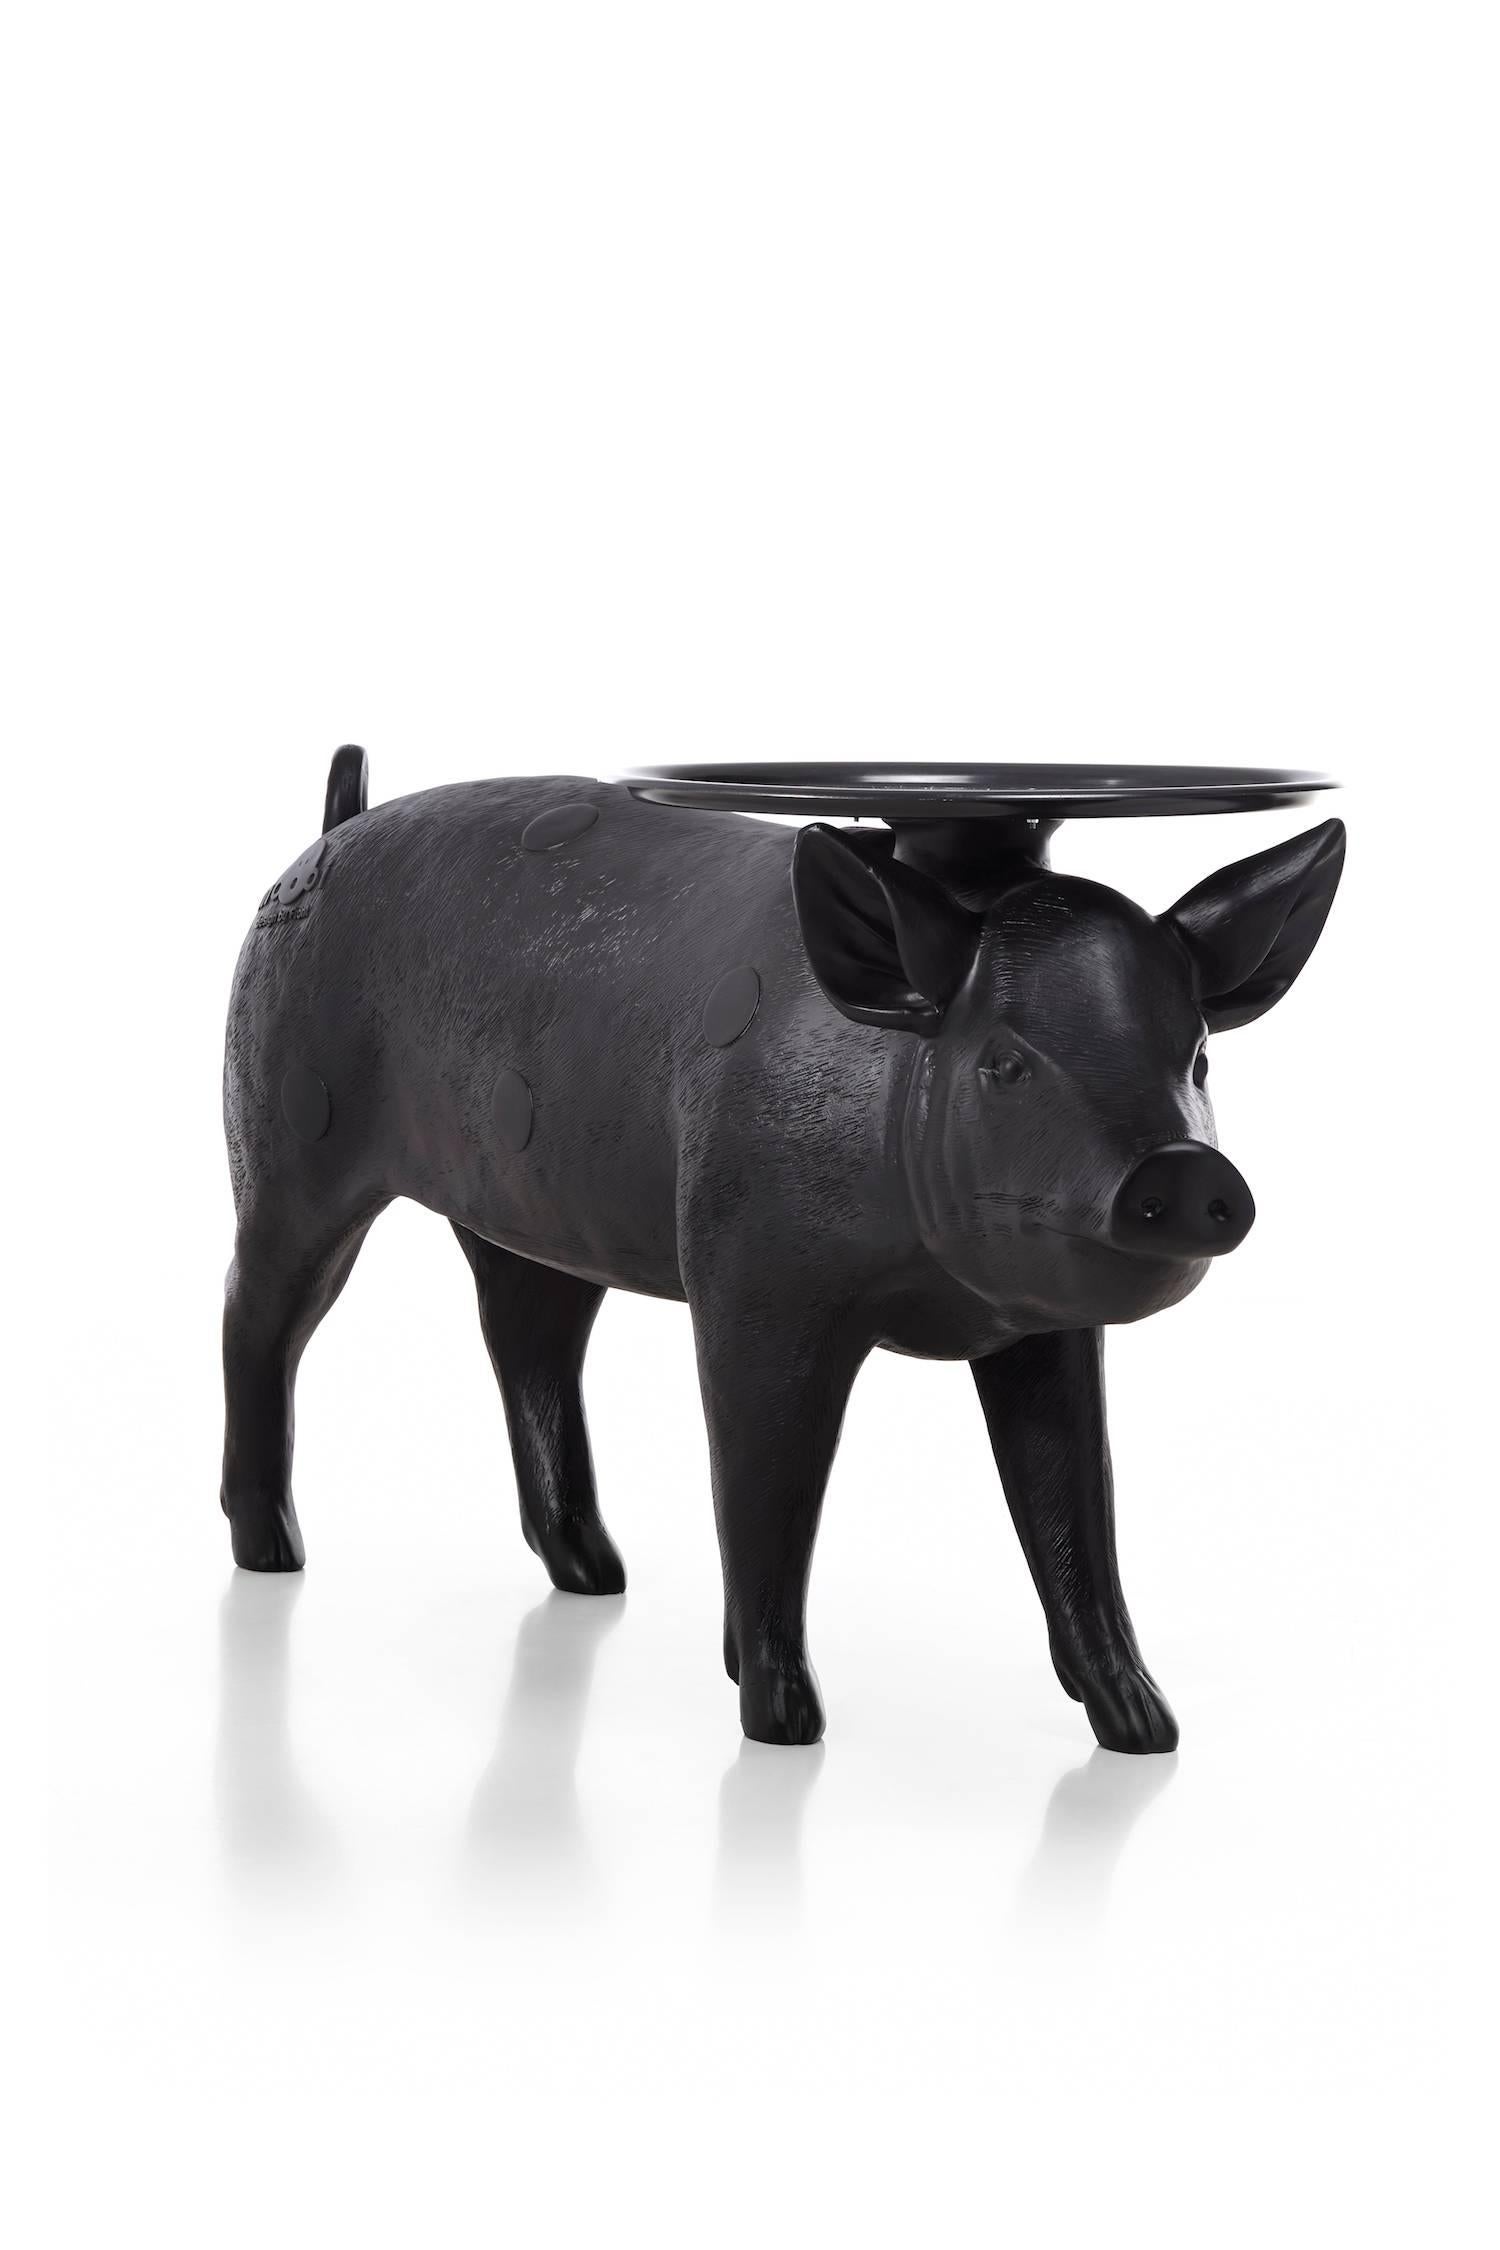 Who wouldn't want to impress their guests with a life sized pig to serve their drinks!

Made from polyester and a powder coated metal tray.